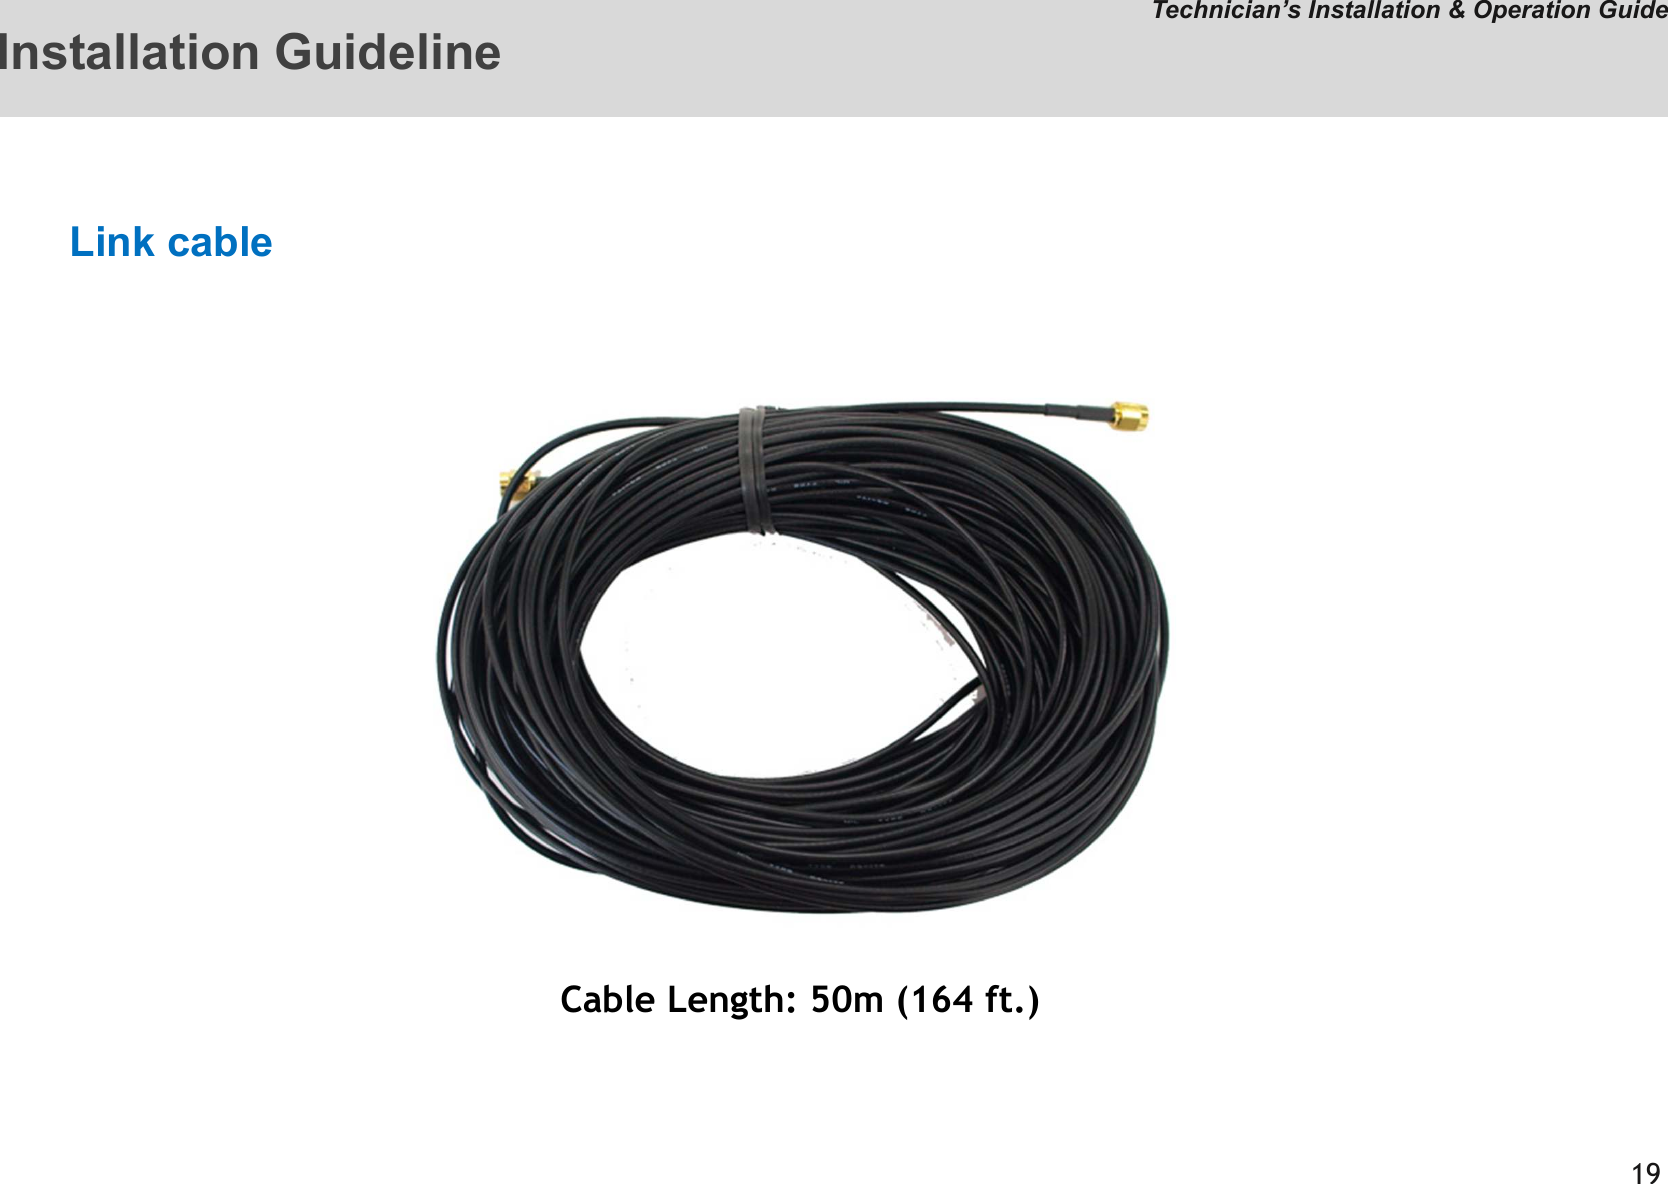 Cable Length: 50m (164 ft.)=Technician’s Installation &amp; Operation GuideLink cableInstallation Guideline